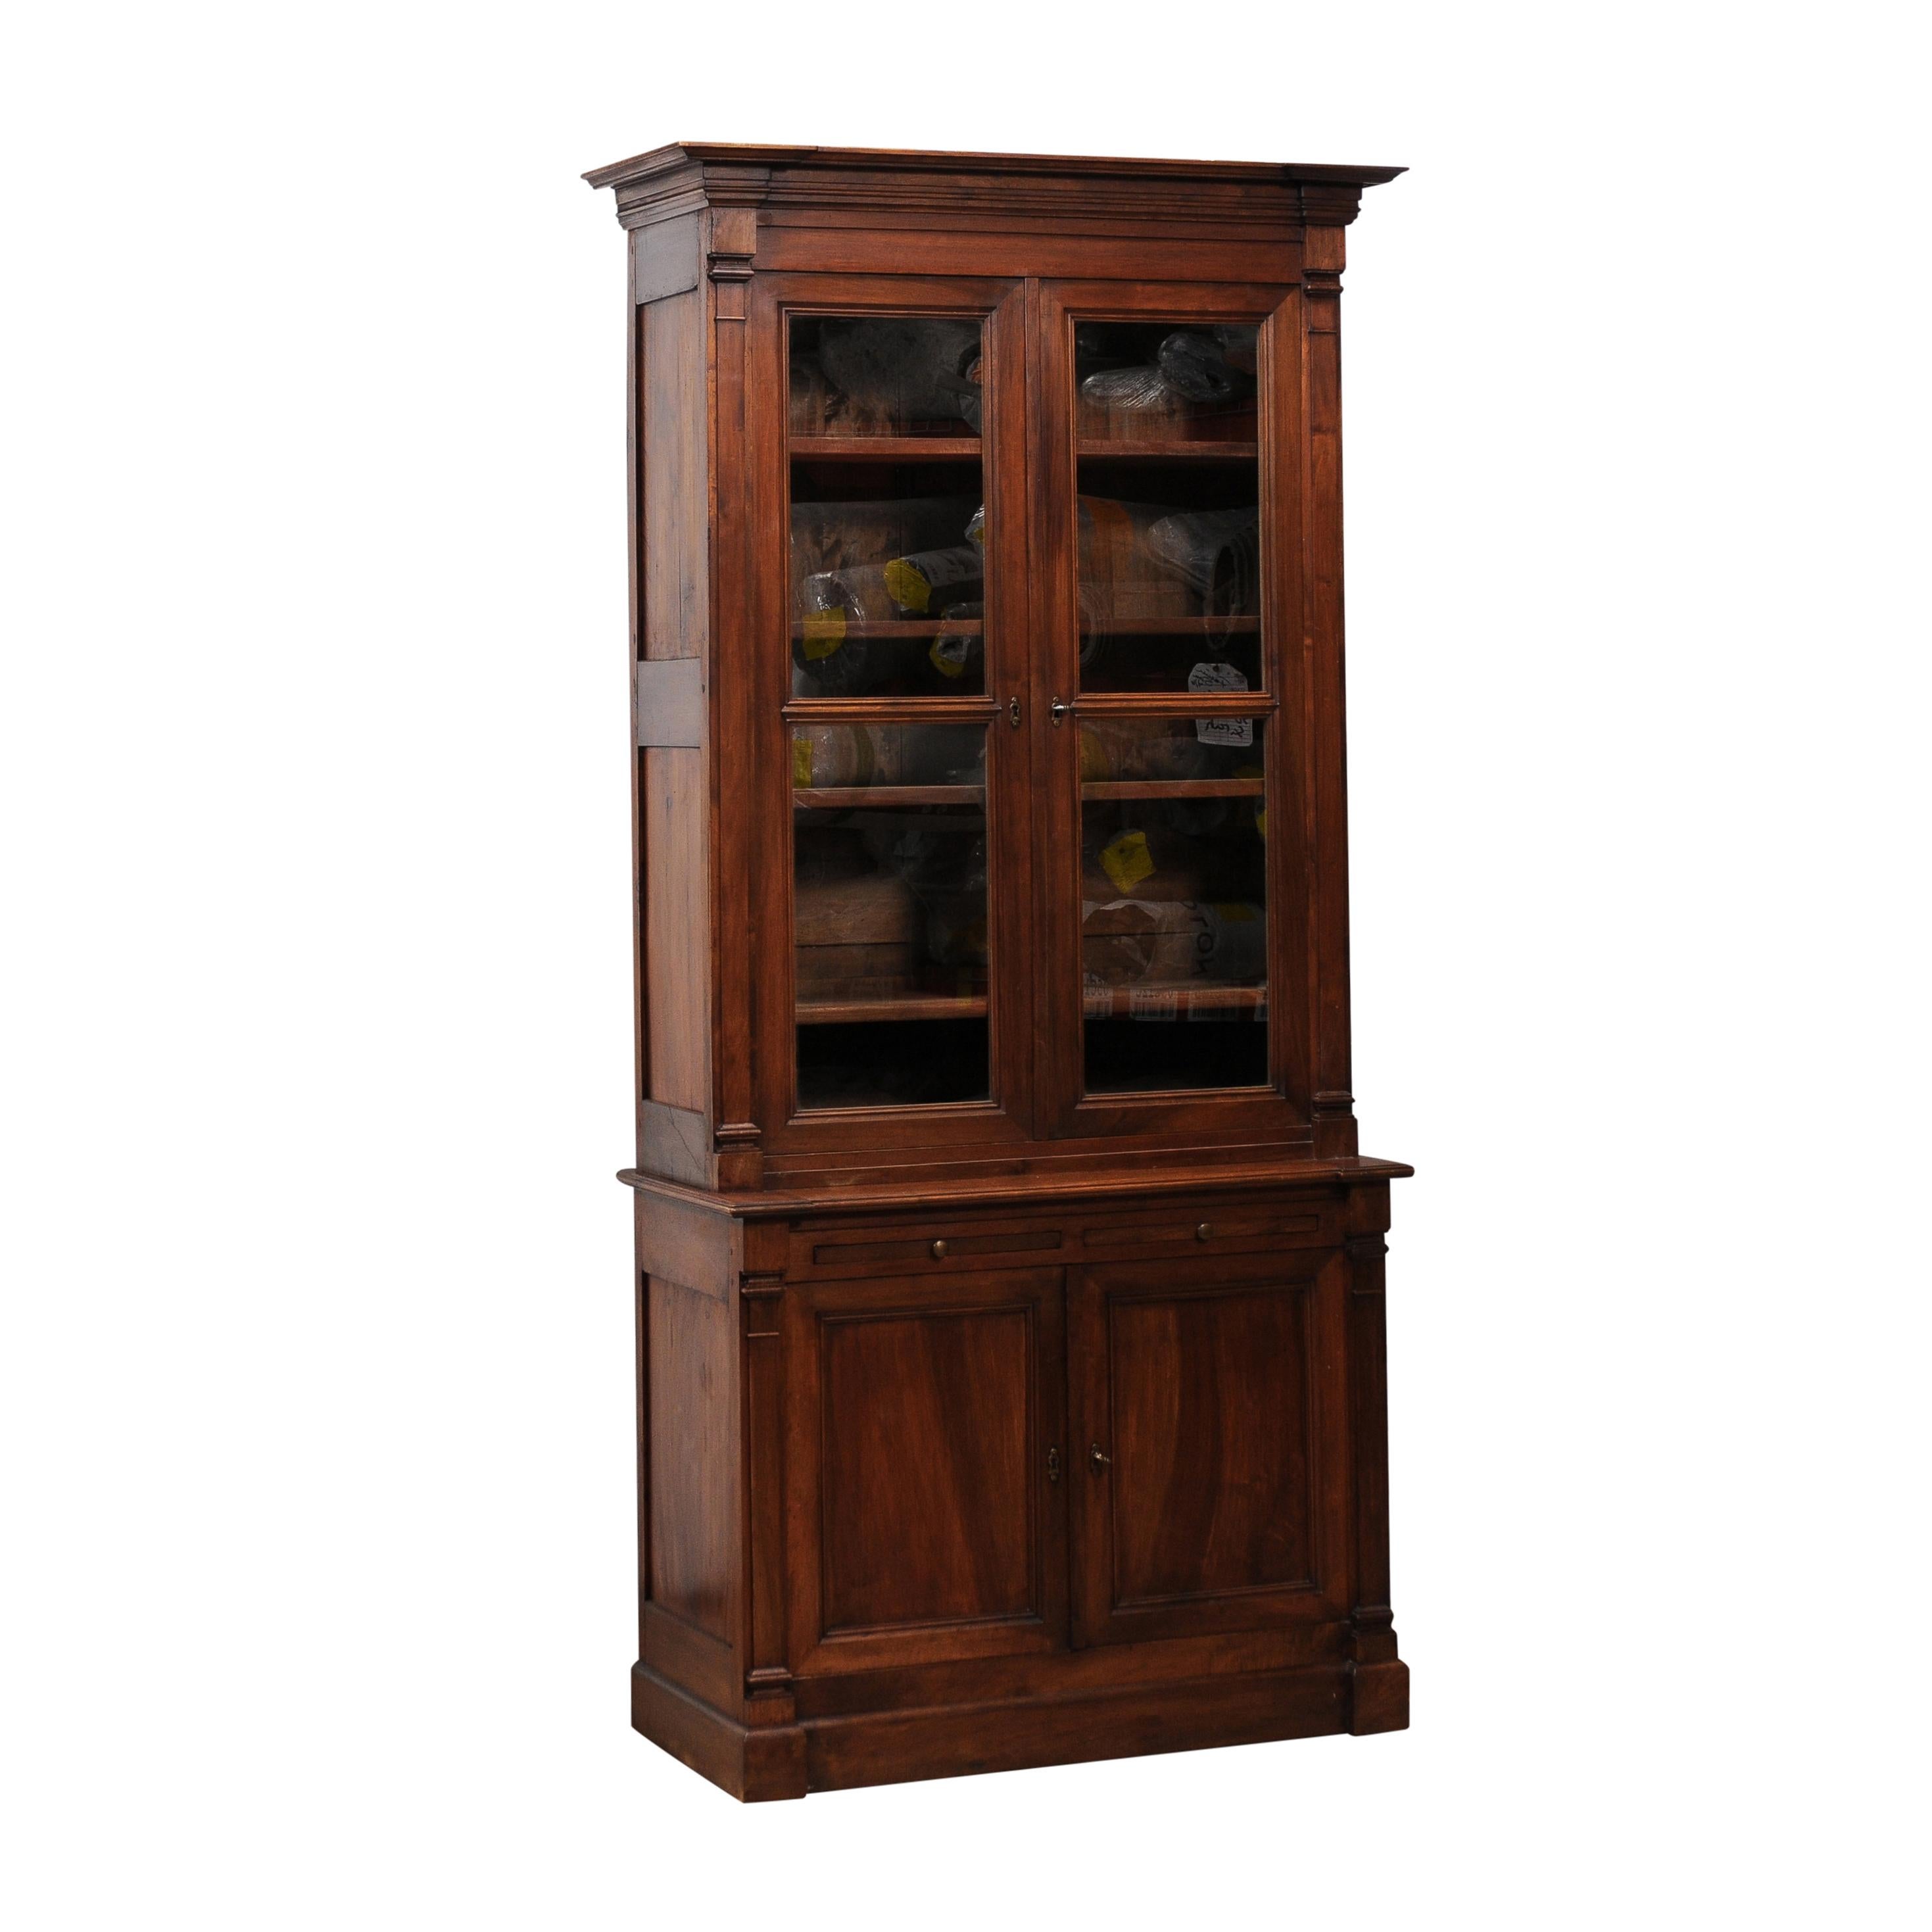 Louis XVI Style 1890s French Bookcase with Glass Doors and Pull Out Drawers For Sale 6